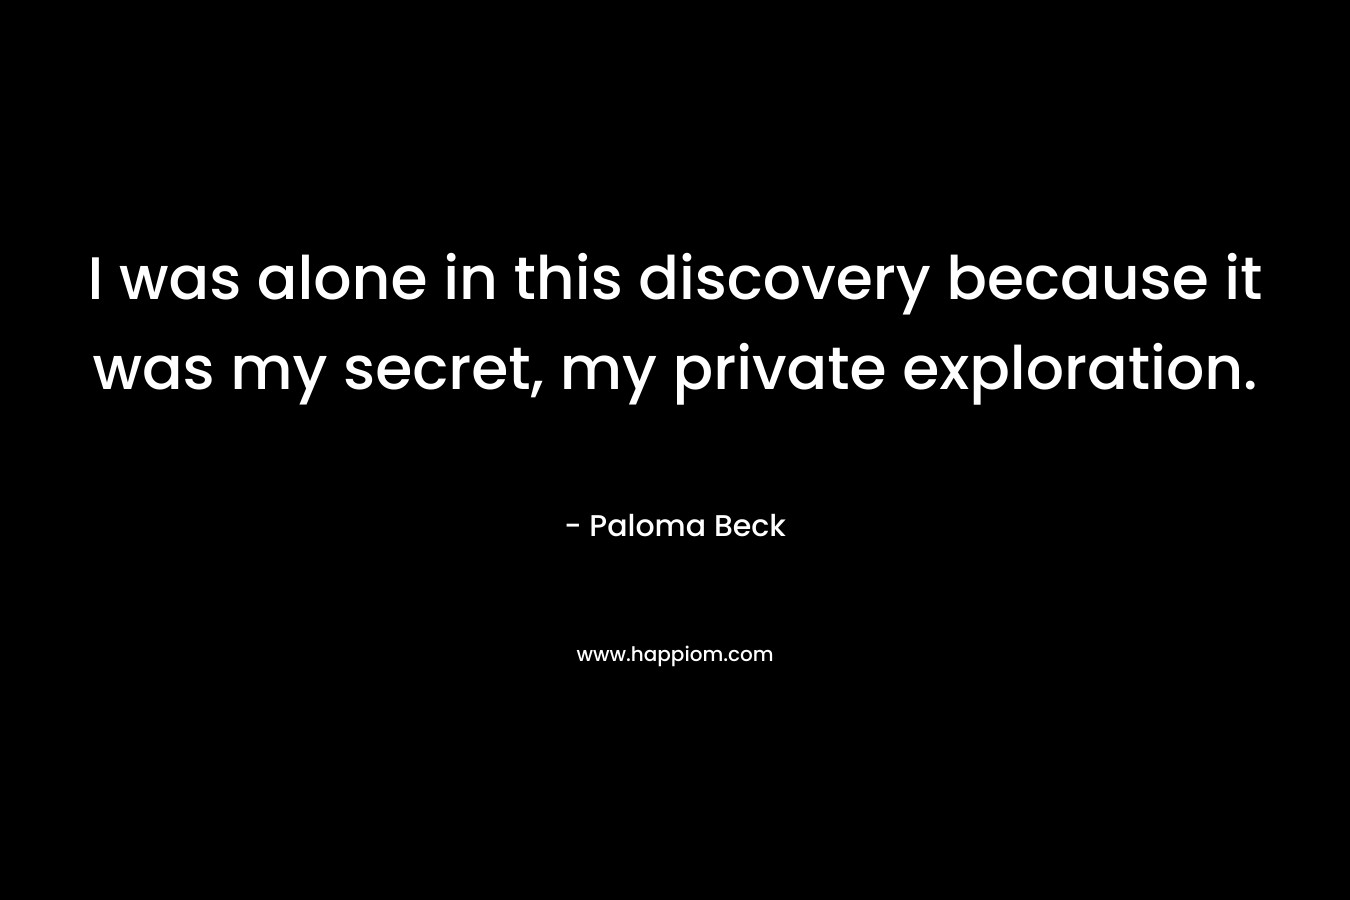 I was alone in this discovery because it was my secret, my private exploration. – Paloma Beck